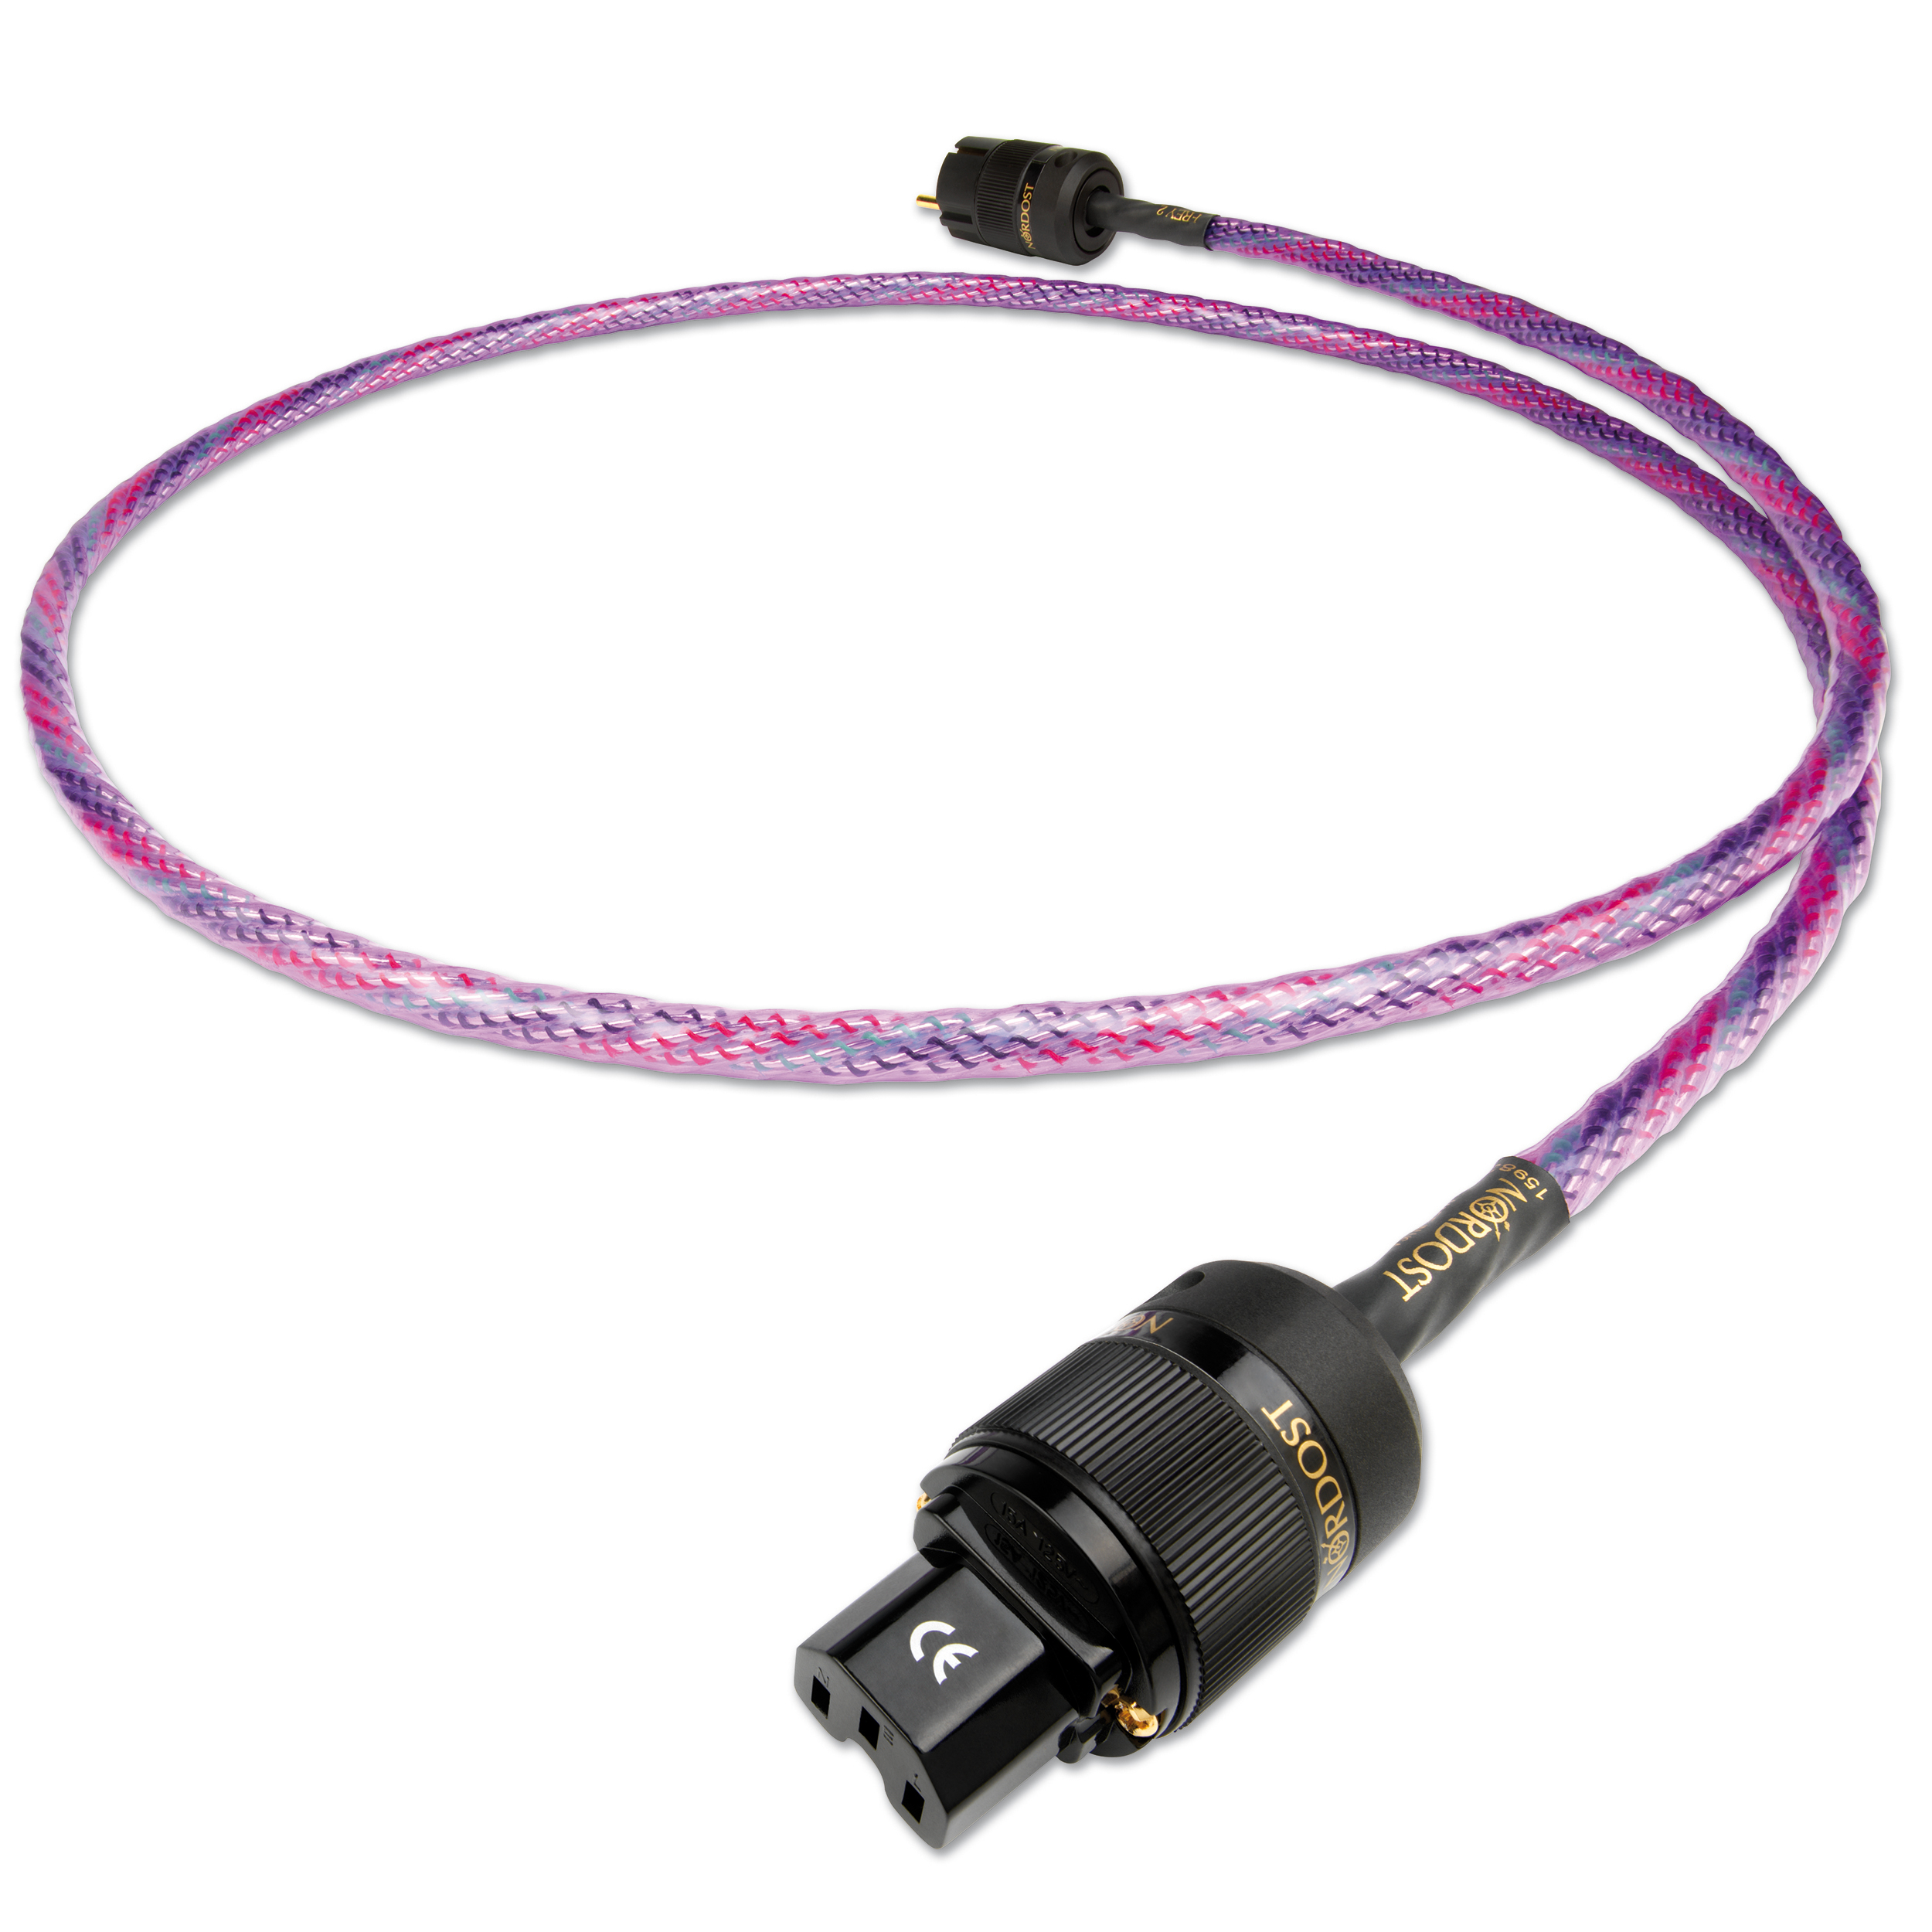 Dây nguồn Nordost Norse 2 Series Frey 2 (US-15)